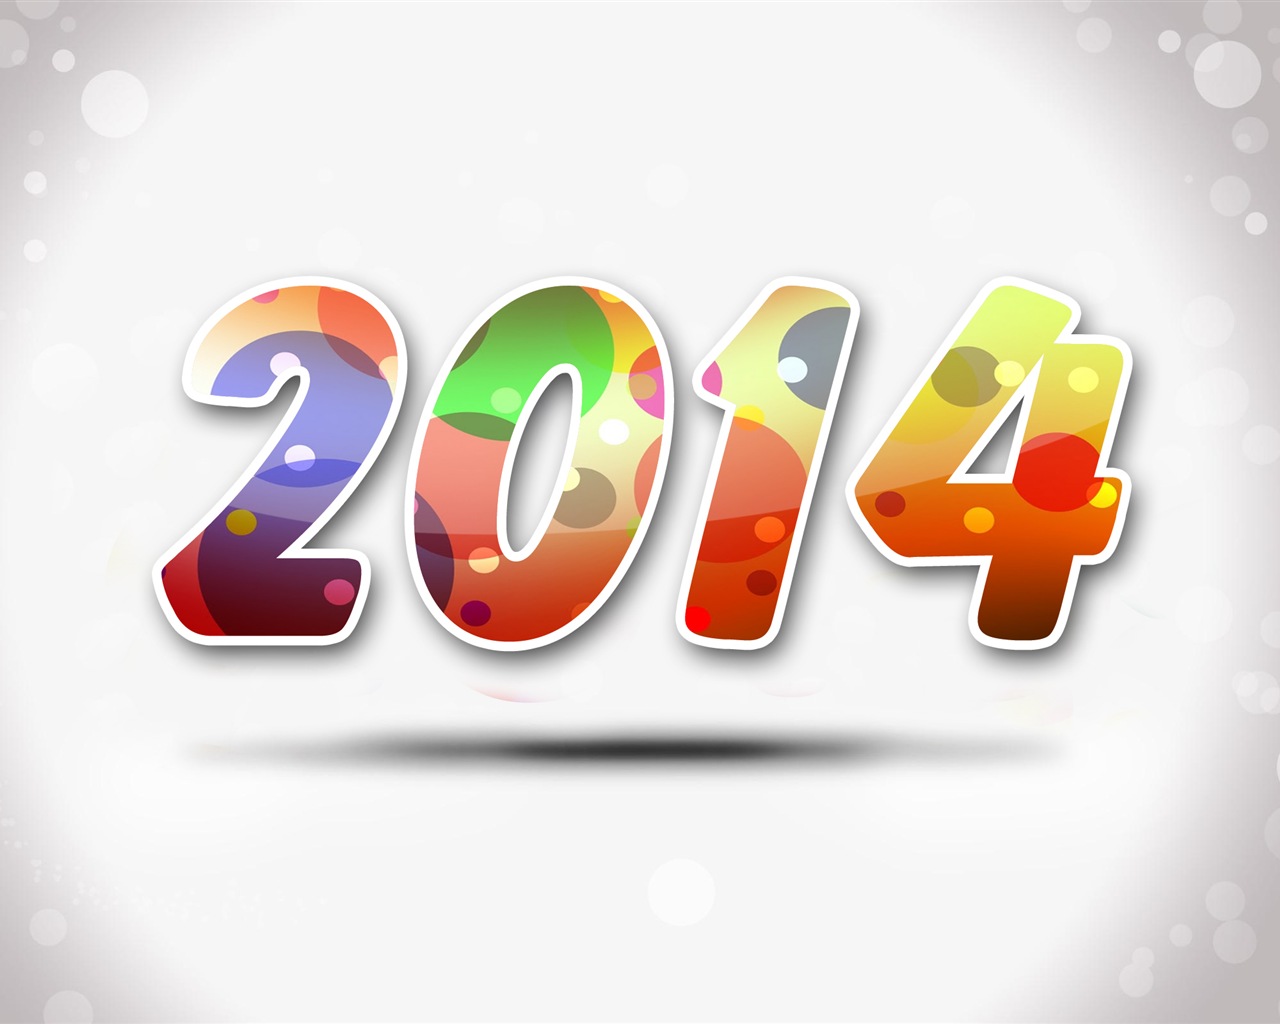 2014 New Year Theme HD Wallpapers (2) #17 - 1280x1024